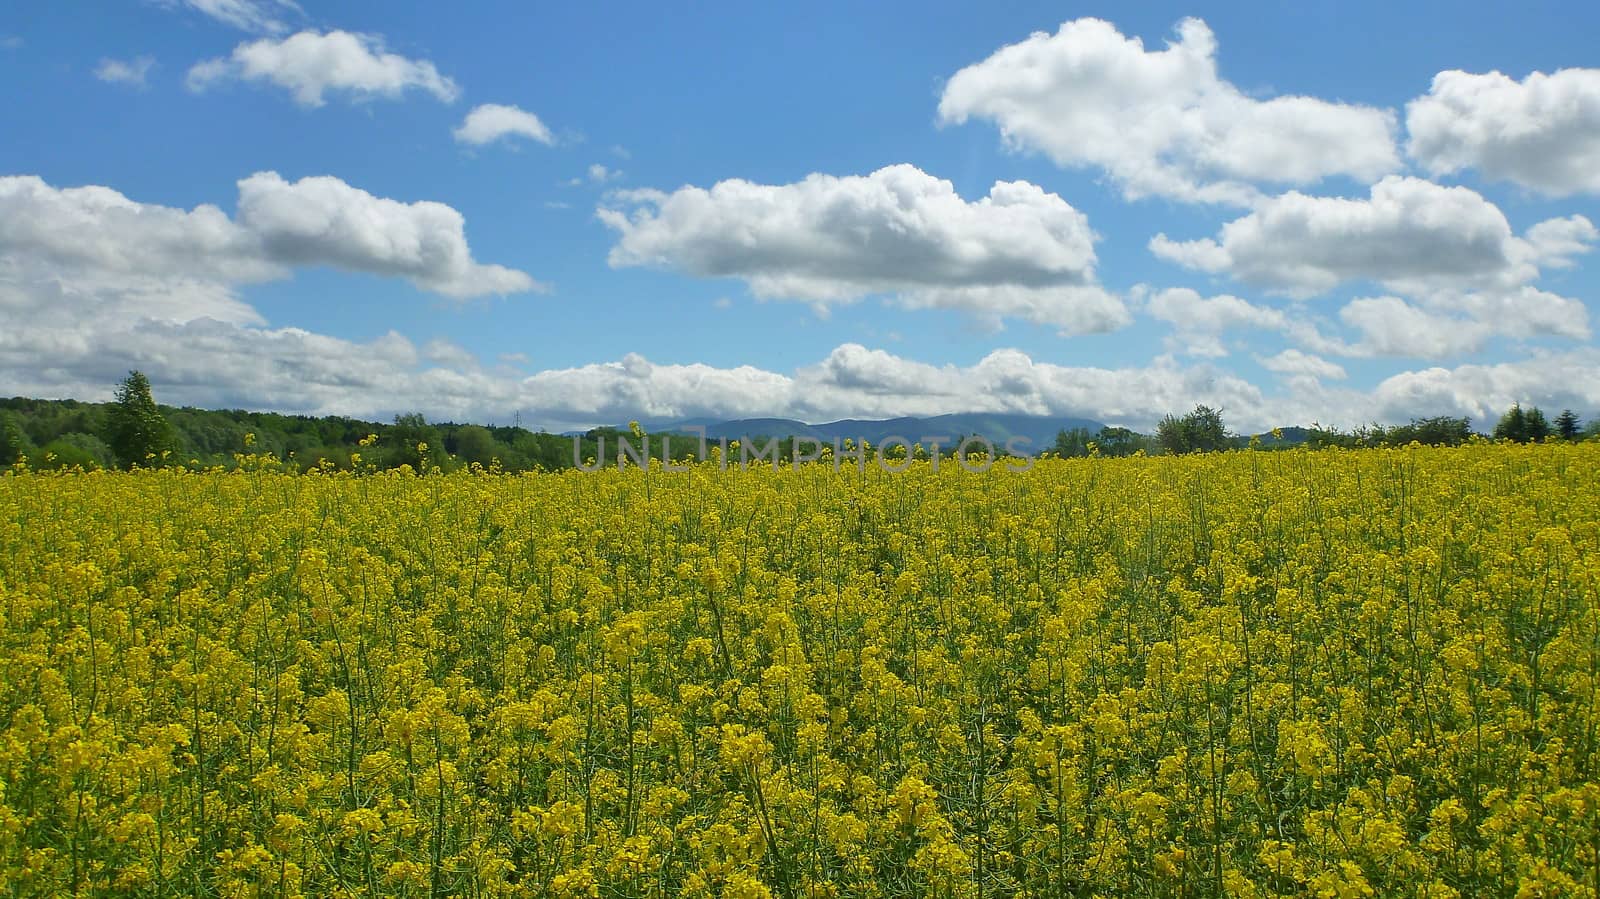 Field of rapeseed with blue sky and clouds.